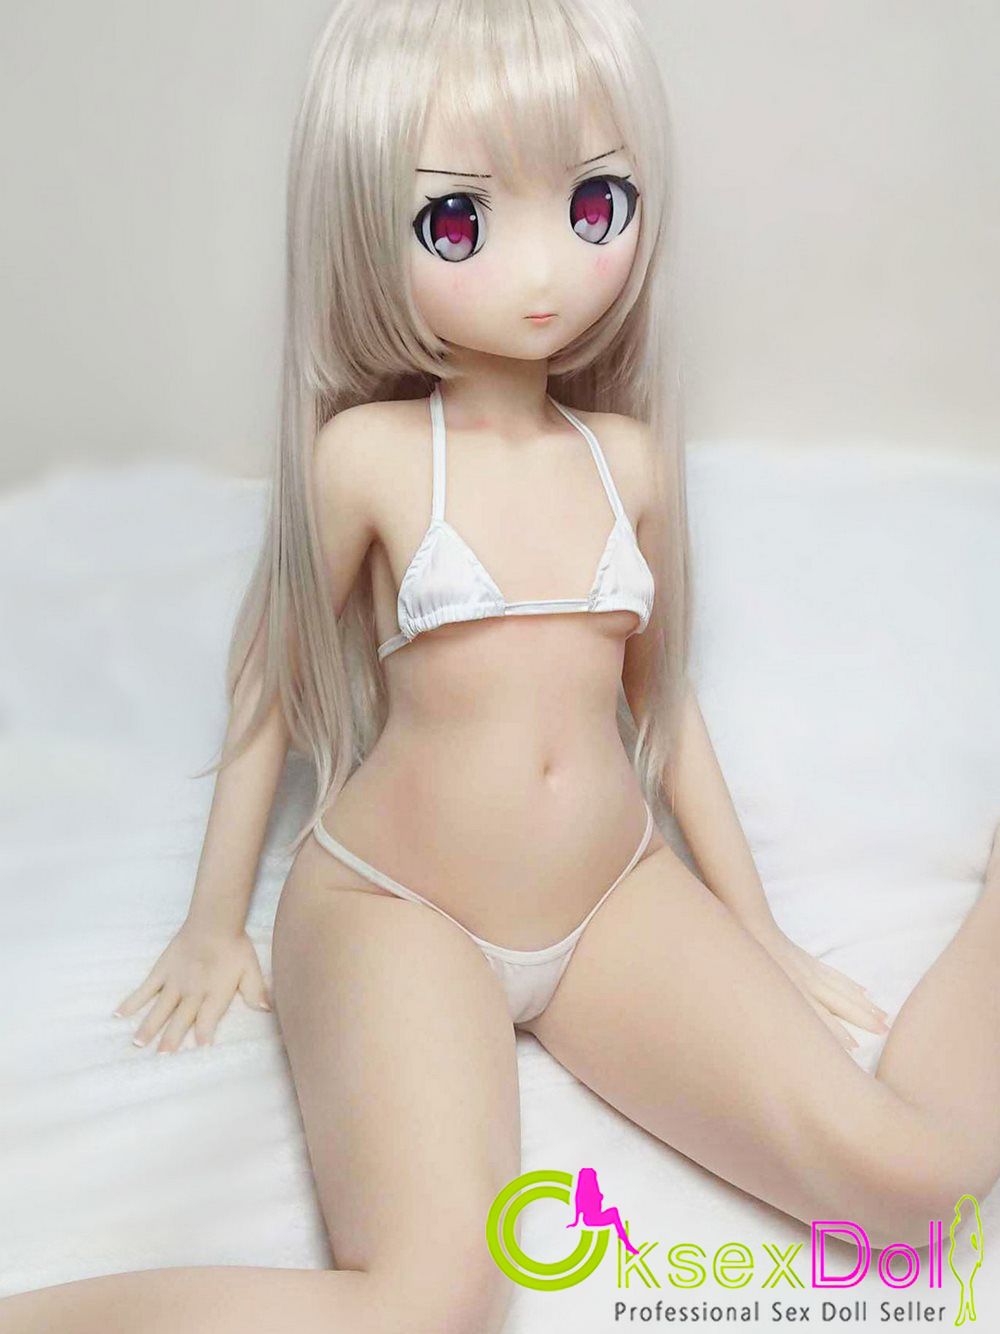 Flat Chested sex doll Photos